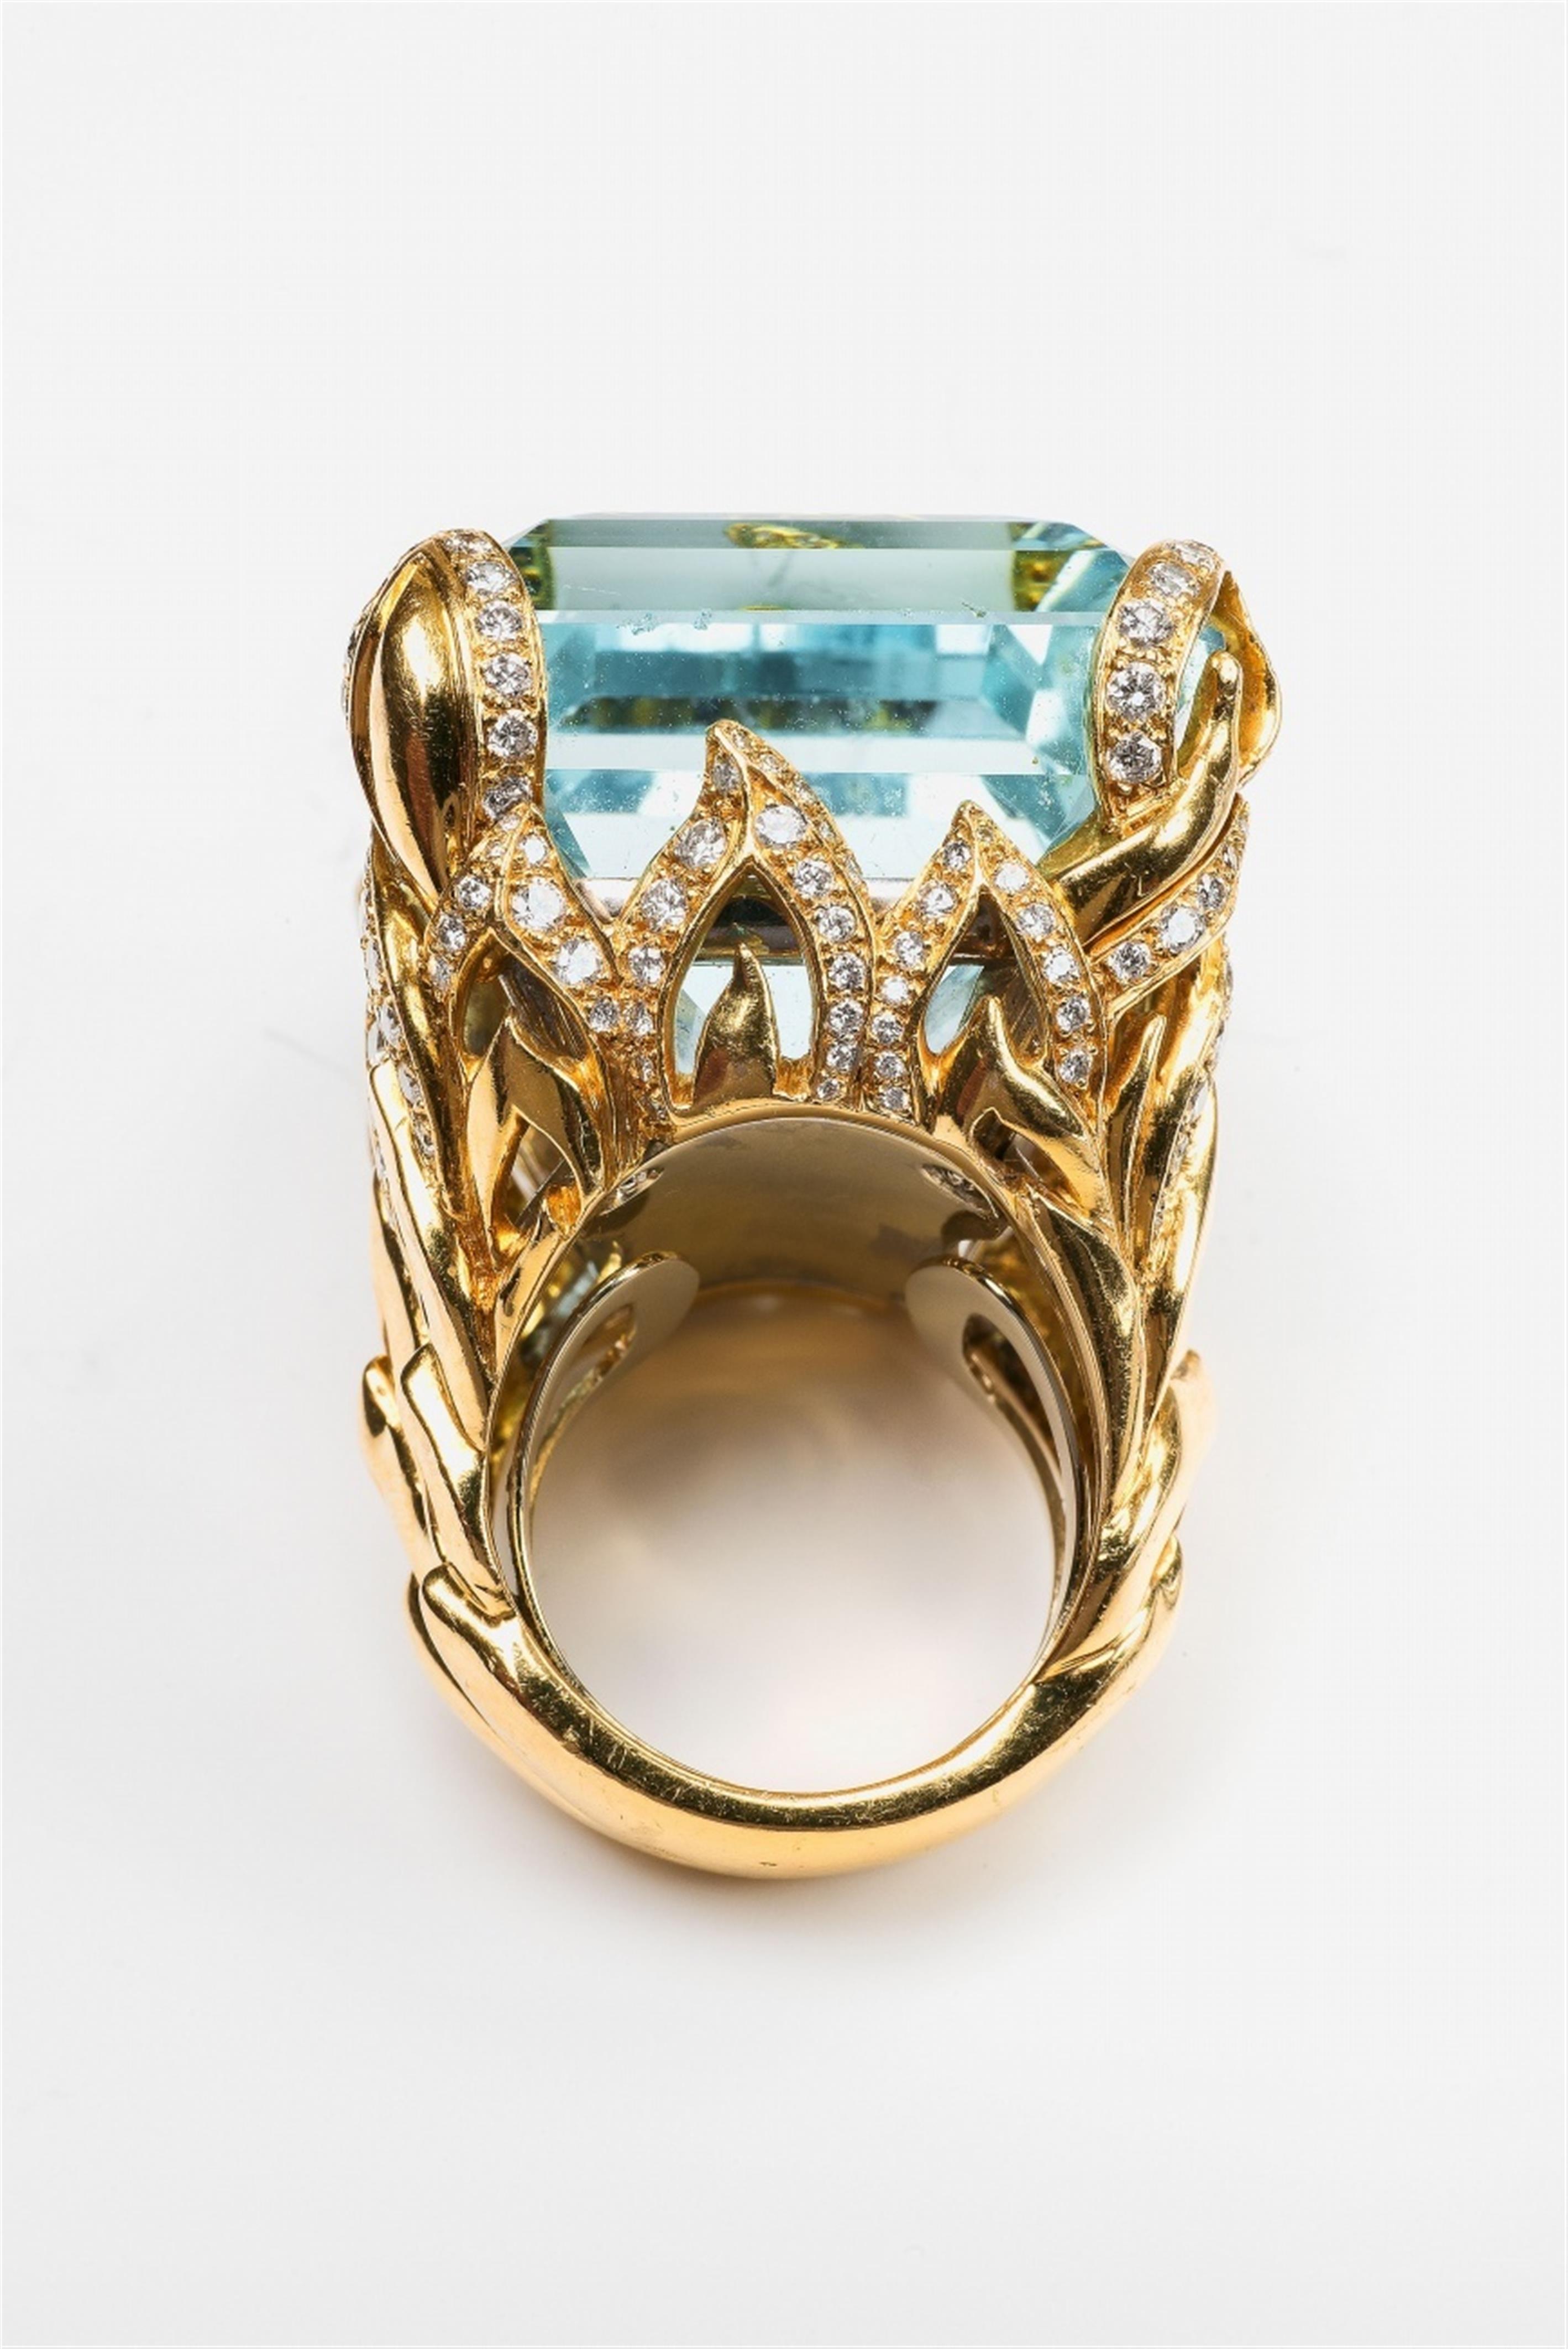 A Dior cocktail ring with a large aquamarine - image-6